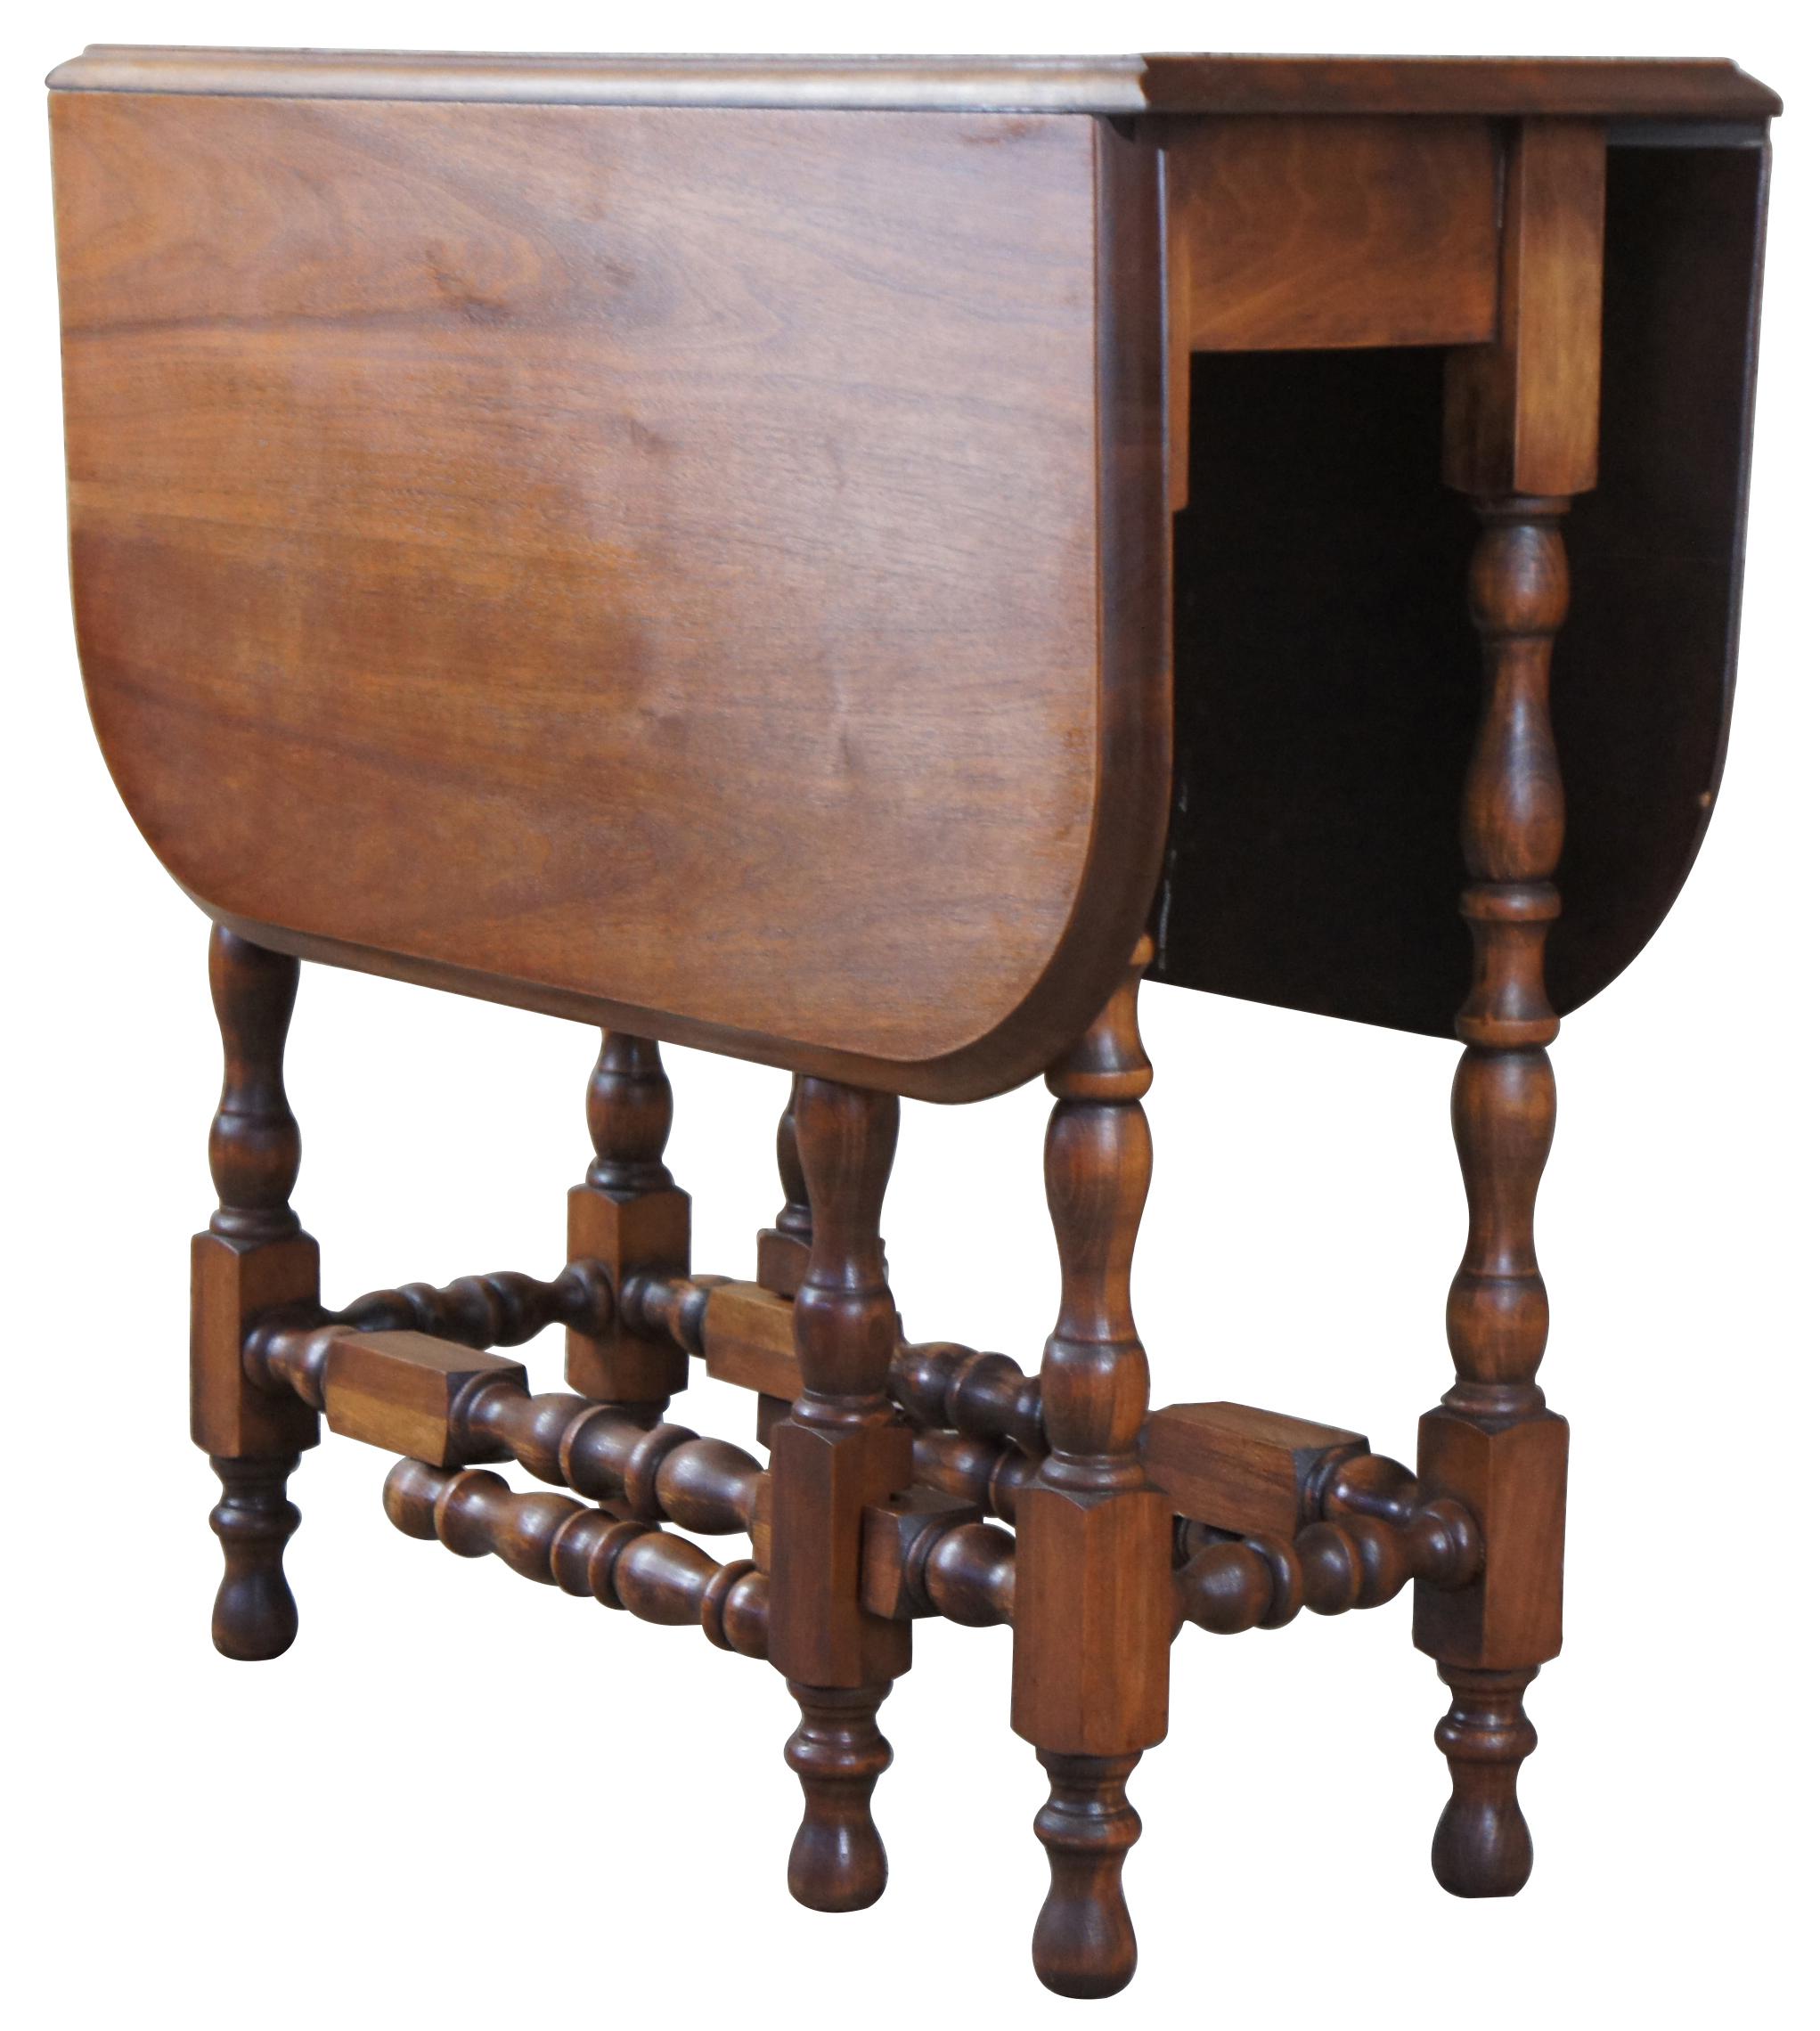 Early 20th century solid walnut drop leaf or gateleg table with drawer. Features an ogee edge and turned supports in William & Mary style.

Leaves add 15.5